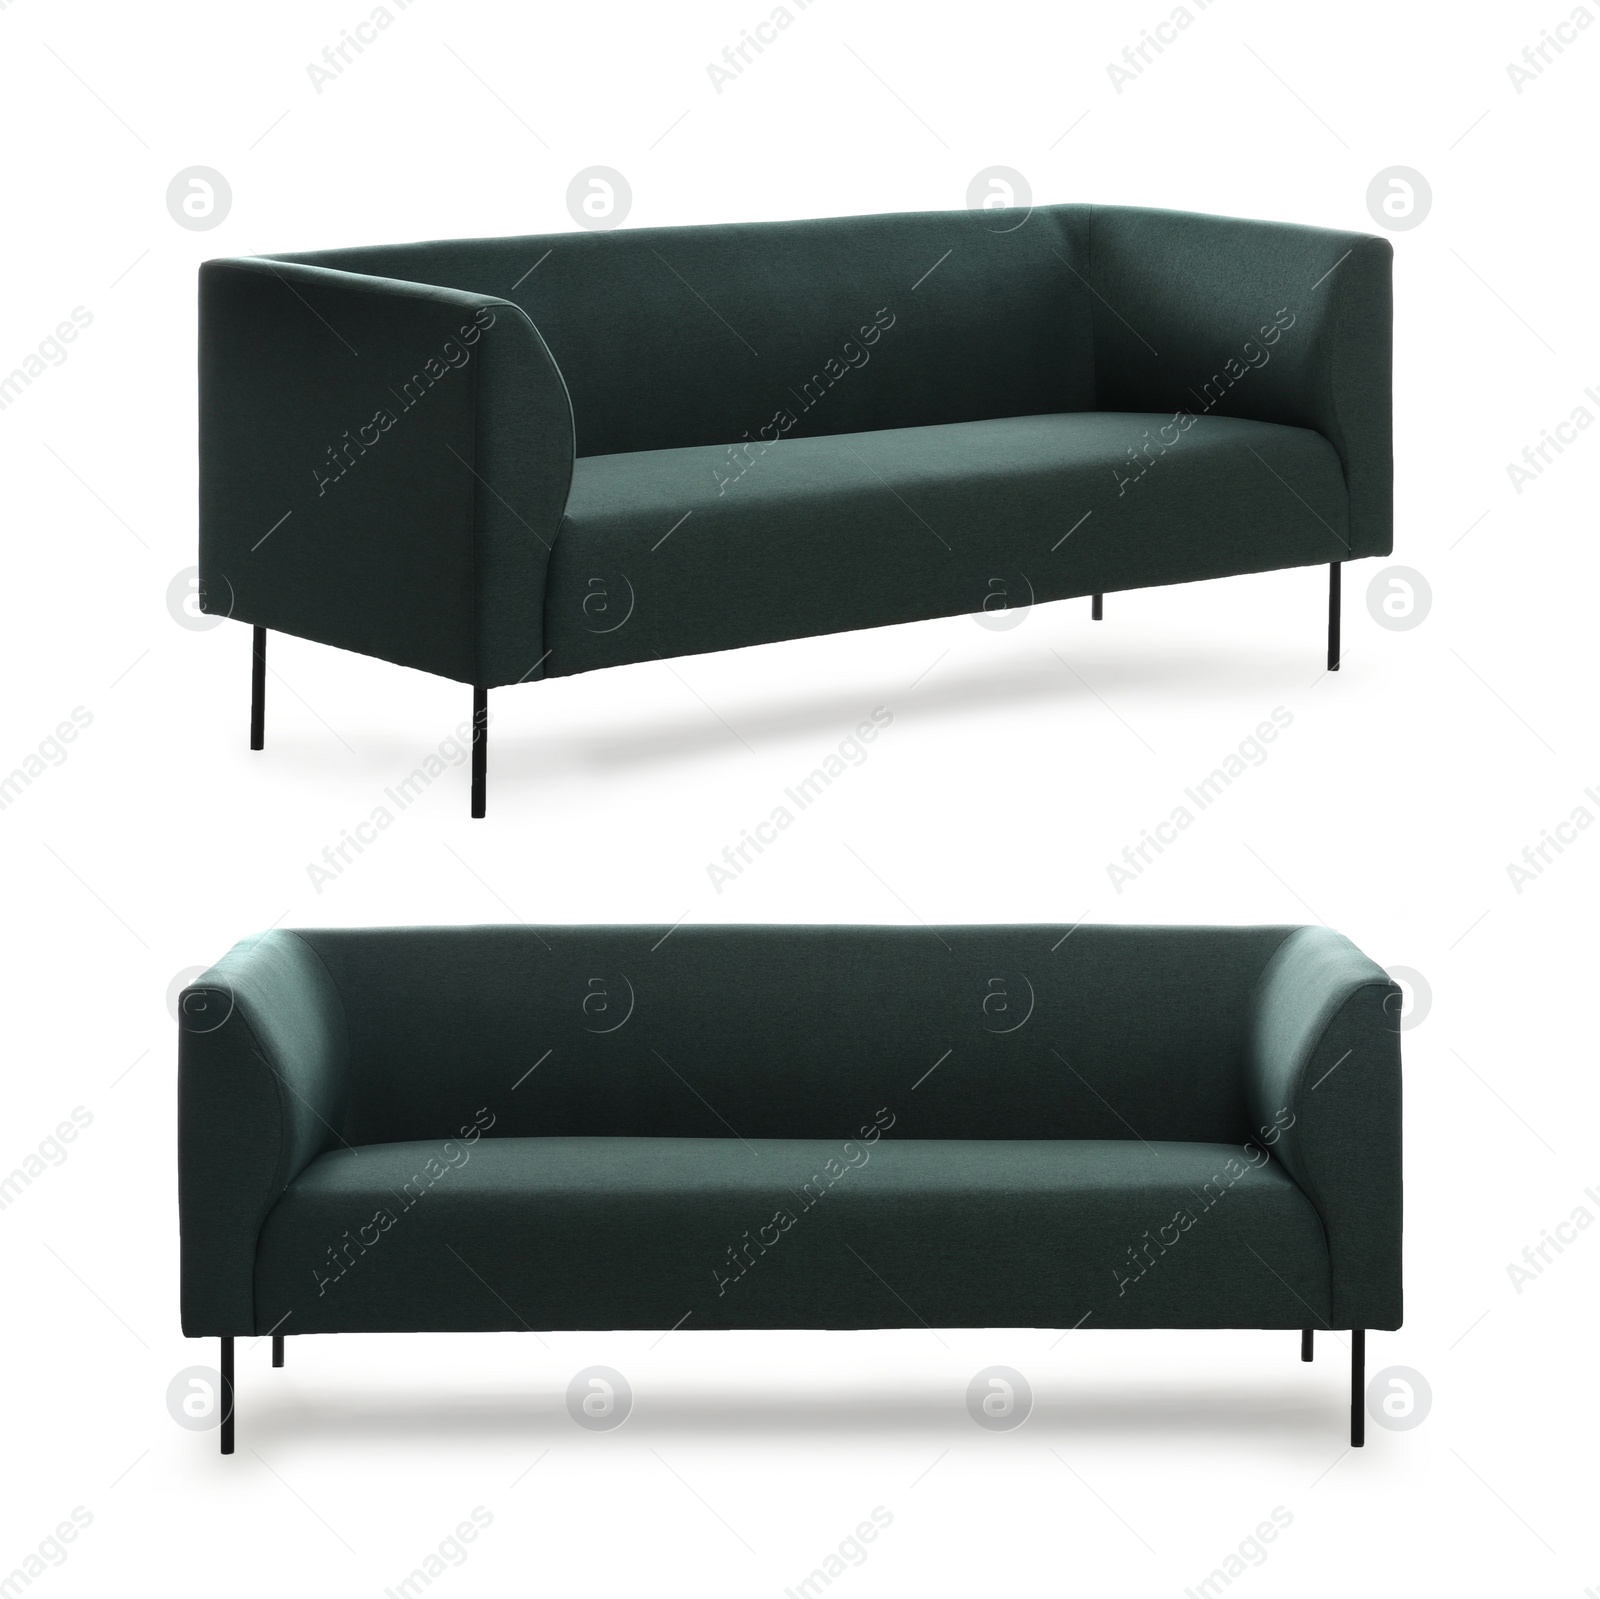 Image of Stylish comfortable green sofas on white background, collage